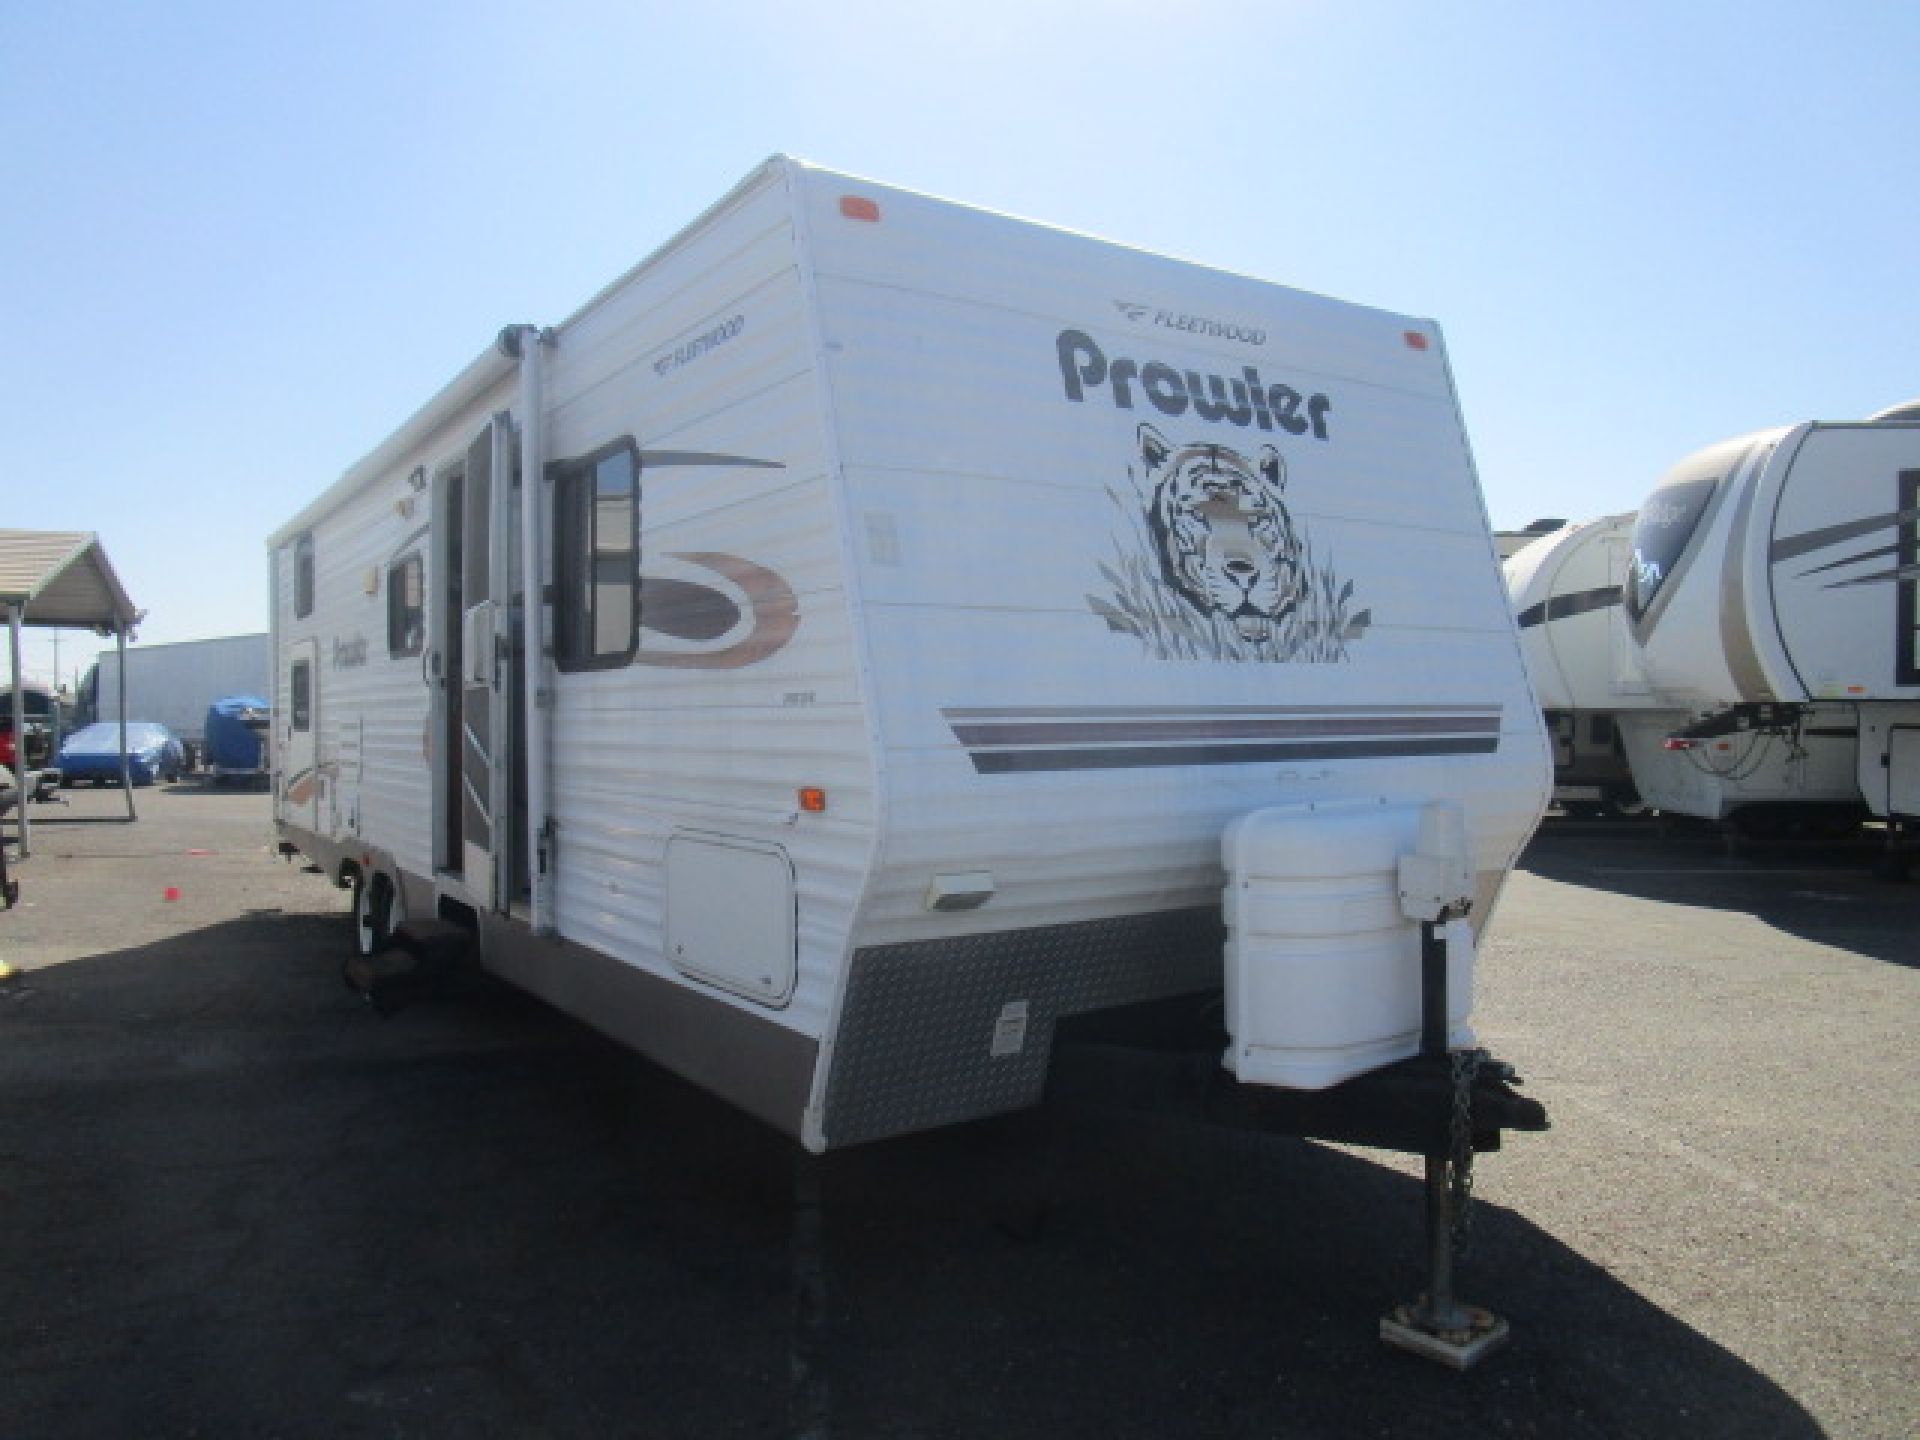 Fleetwood Prowler 300BHS Bunkhouse Model Extreme Edition 2005